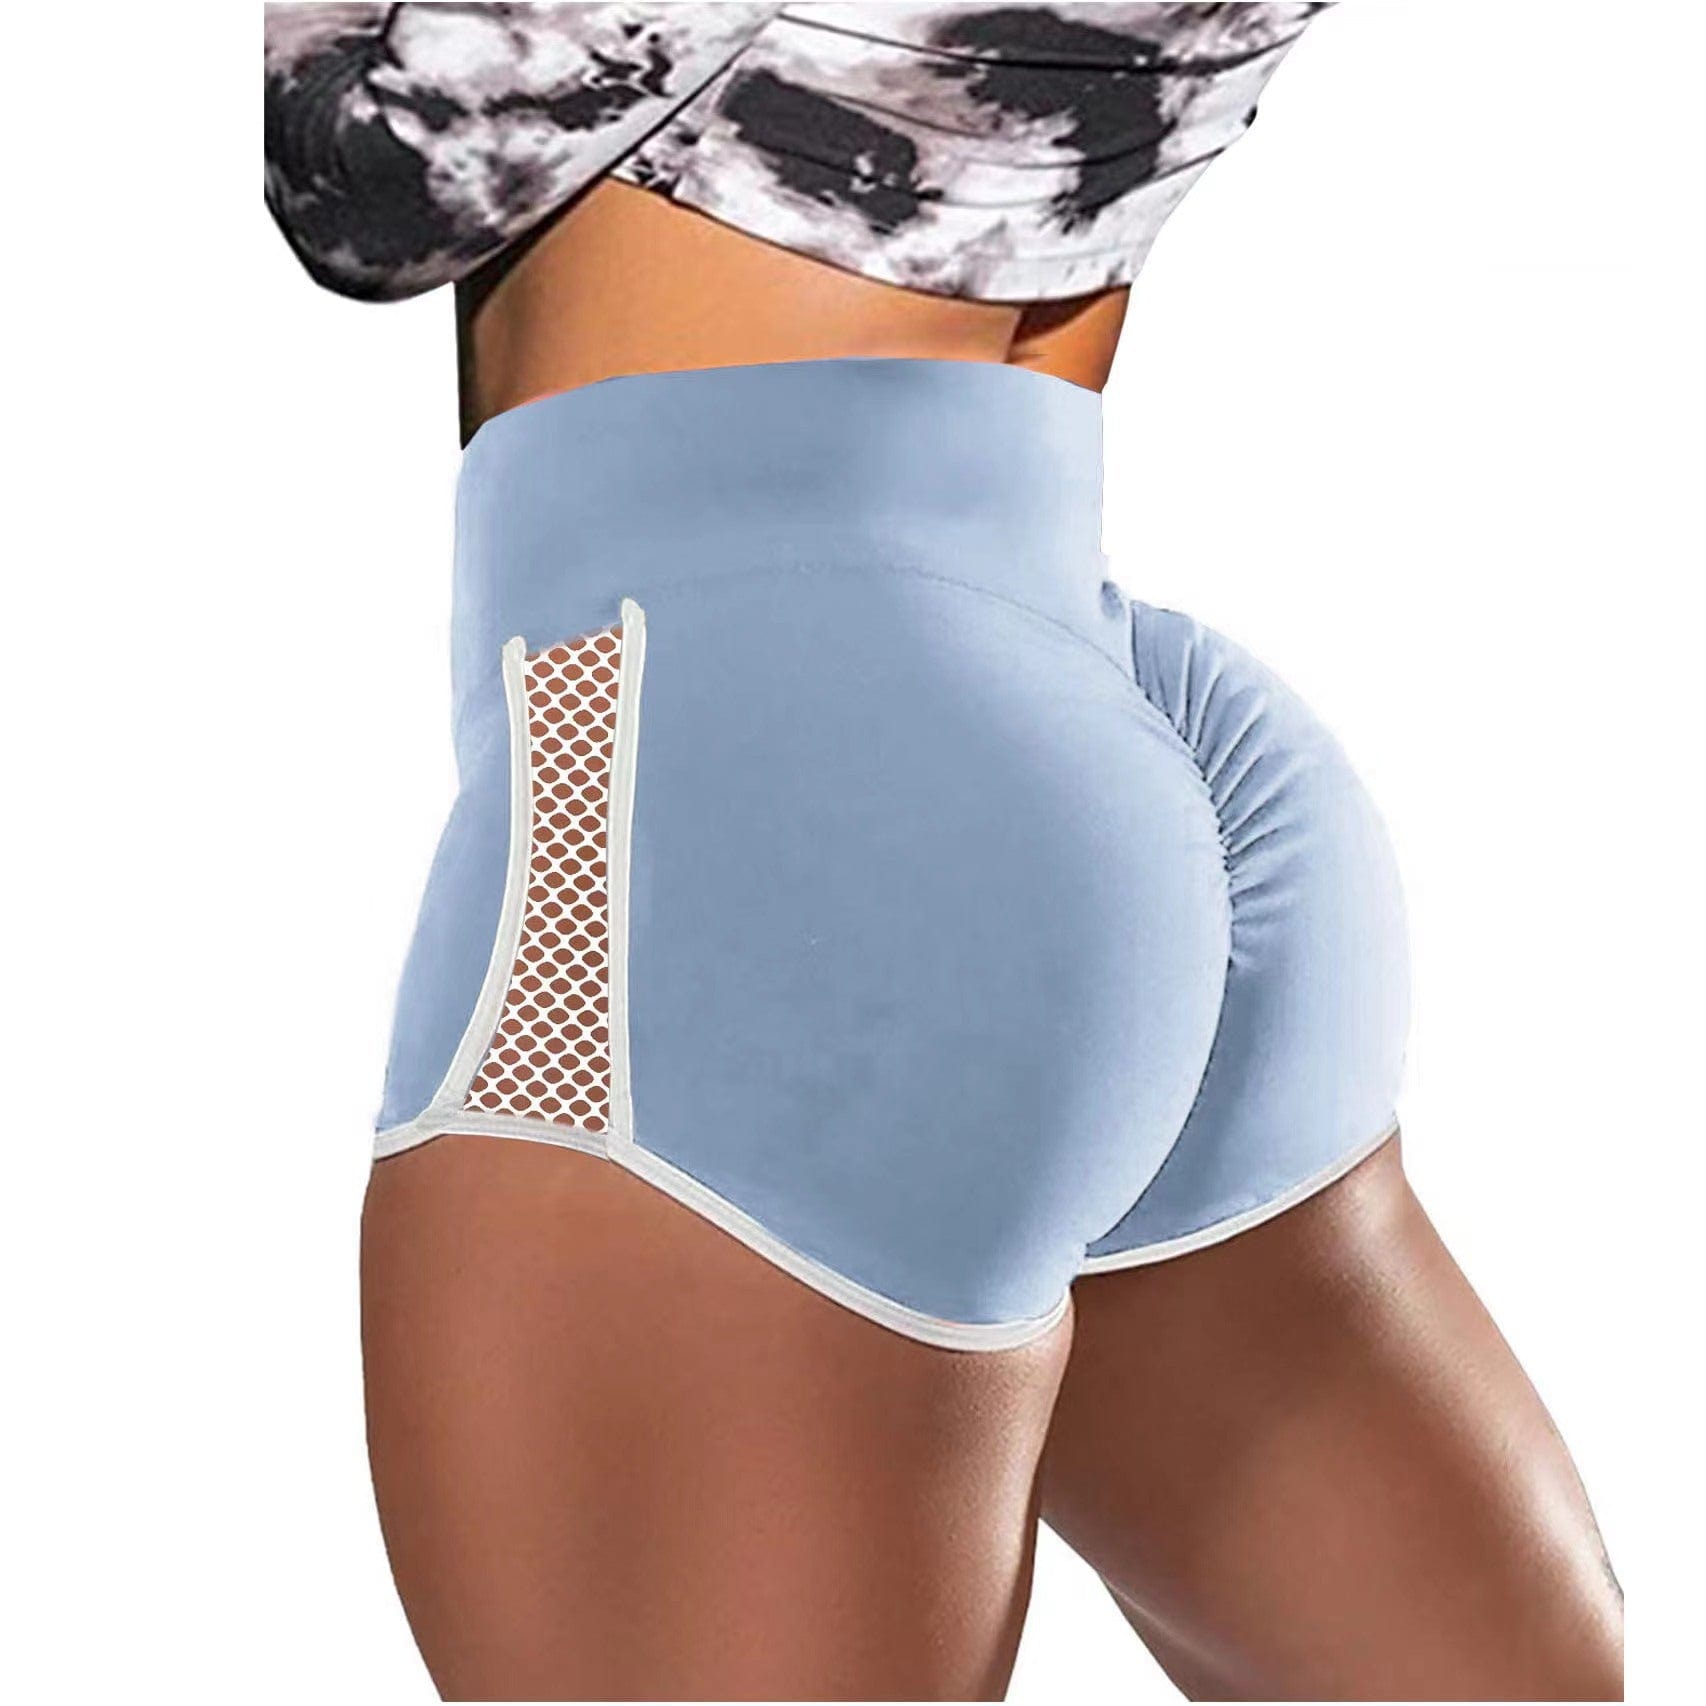 ALLRJ Sky Blue / L Cross-border European And American Foreign Trade Shorts High Waist Shaping Shorts Fitness Sports Pants Hollow Out Stitching Shorts